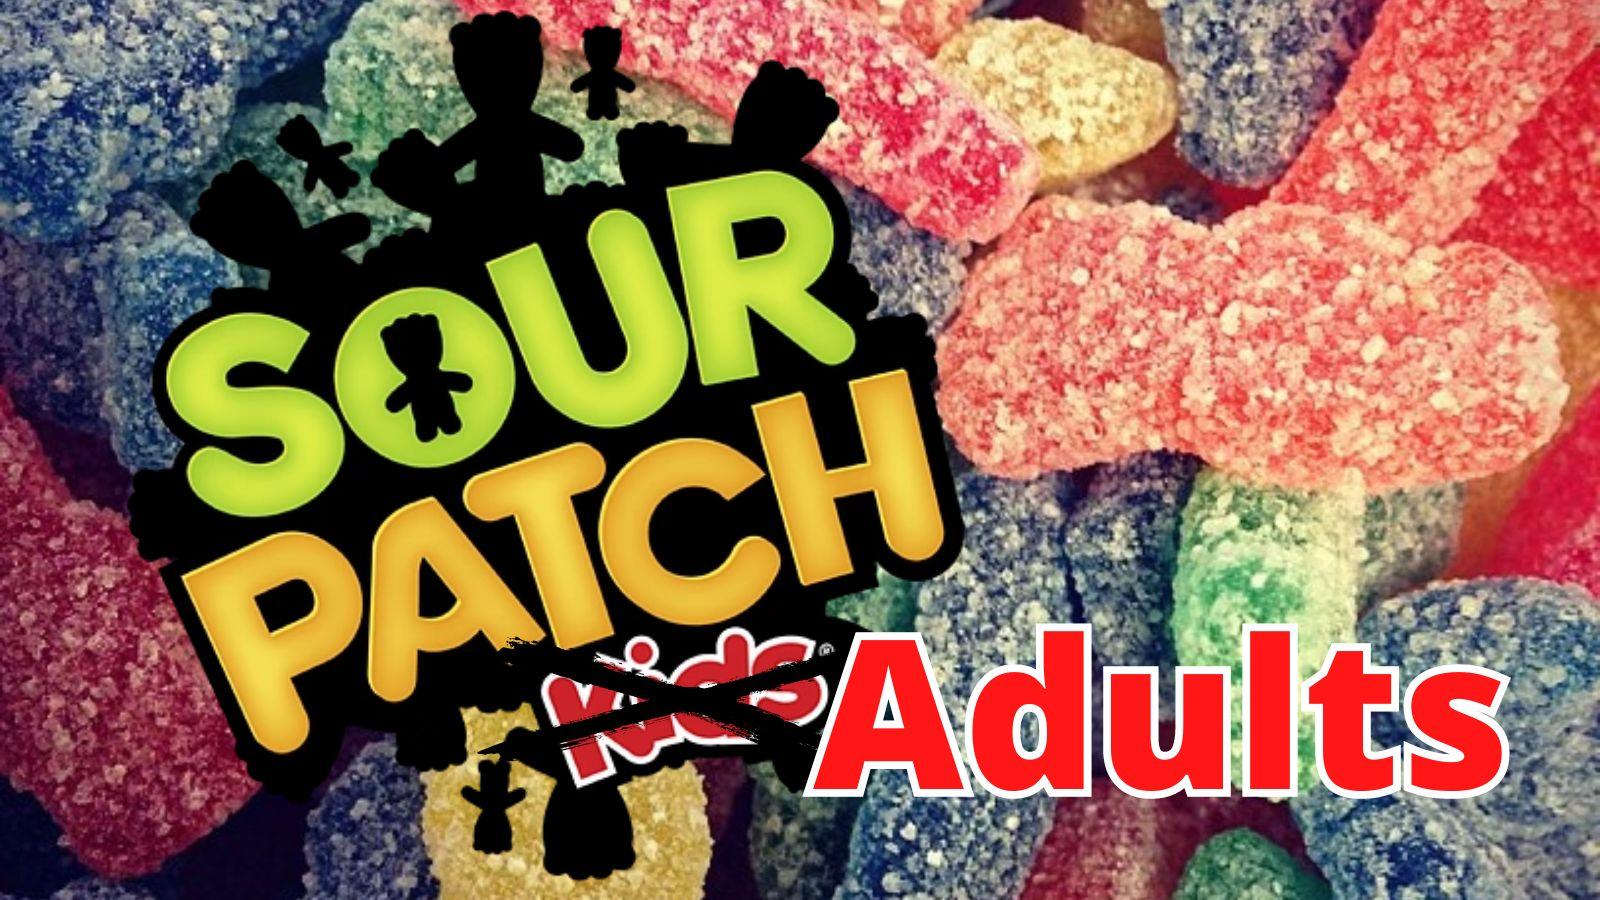 sour patch kids adults header